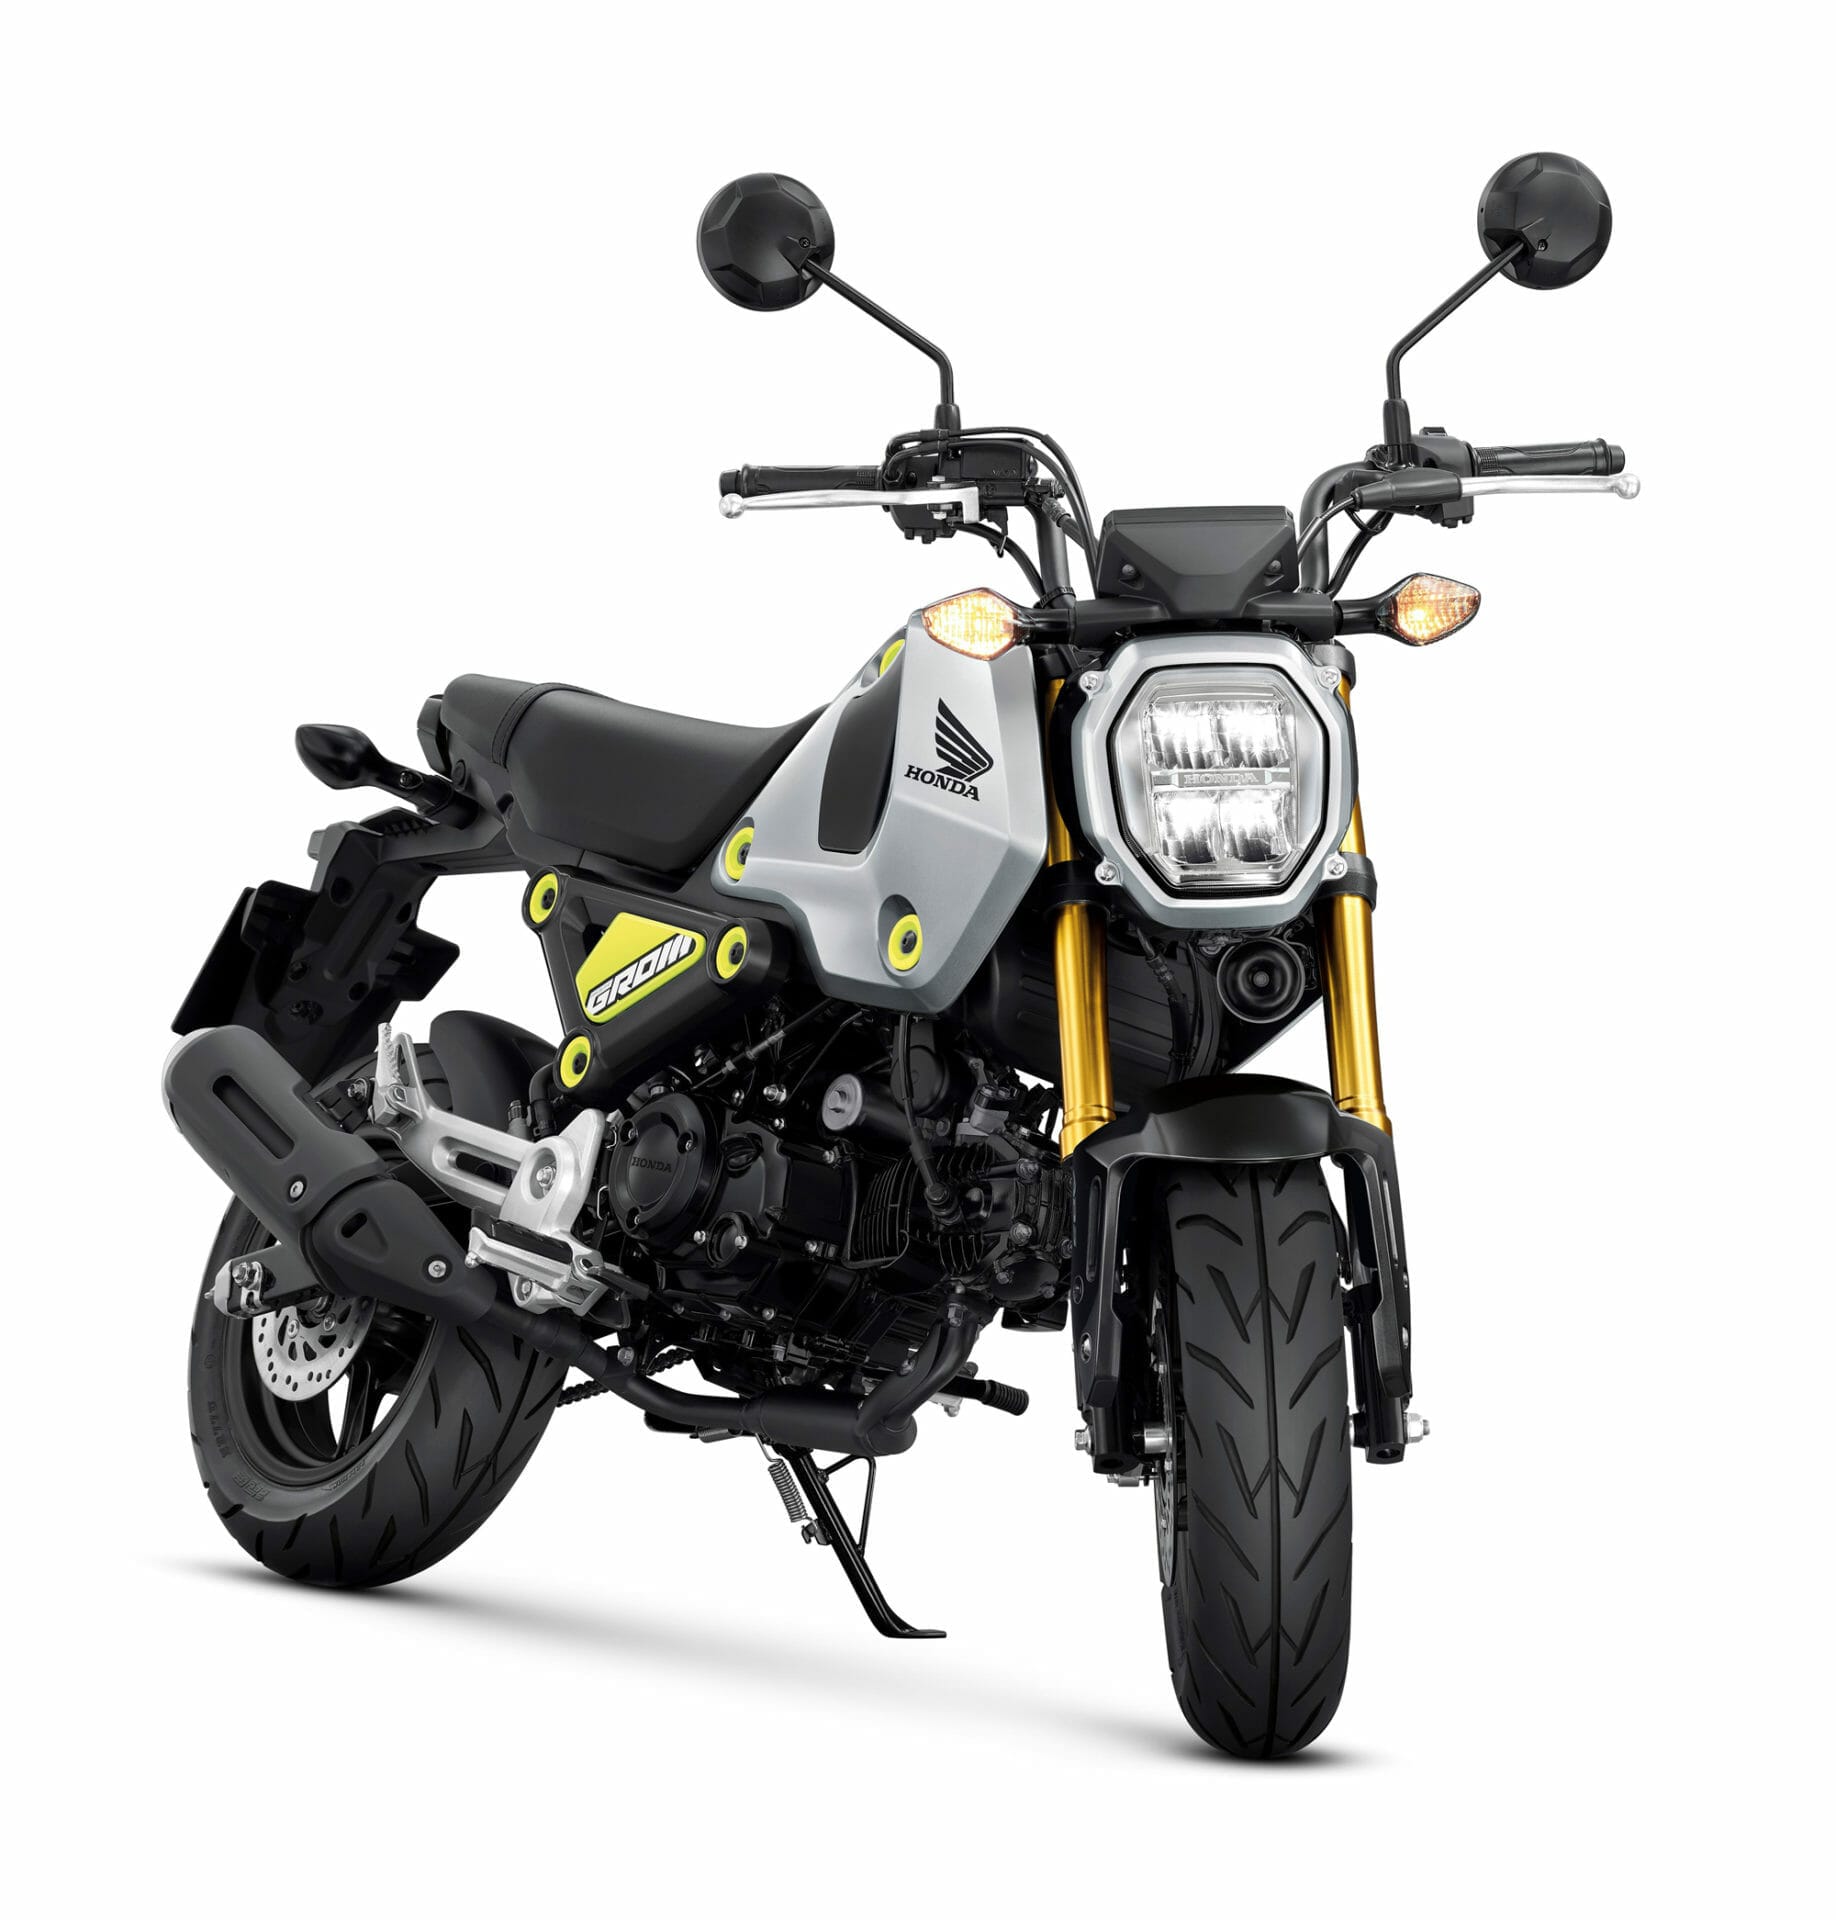 New Honda MSX 125 Grom for 2021
- also in the App MOTORCYCLE NEWS